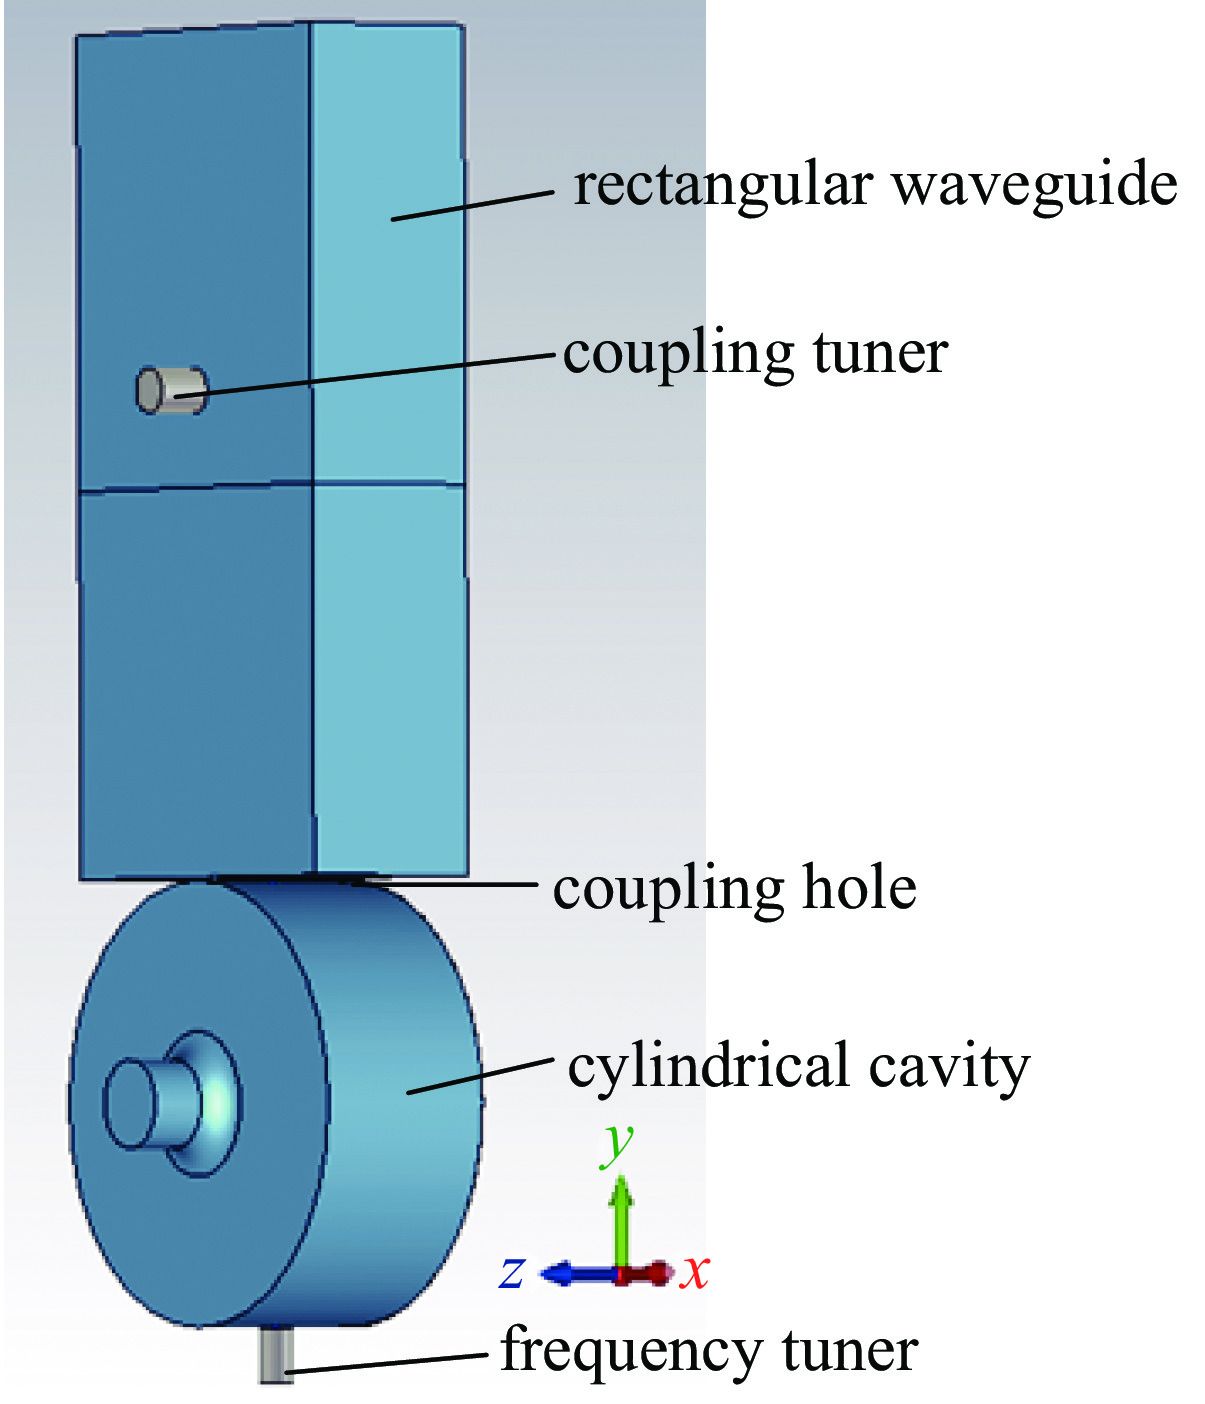 Simulation model of the coupling system